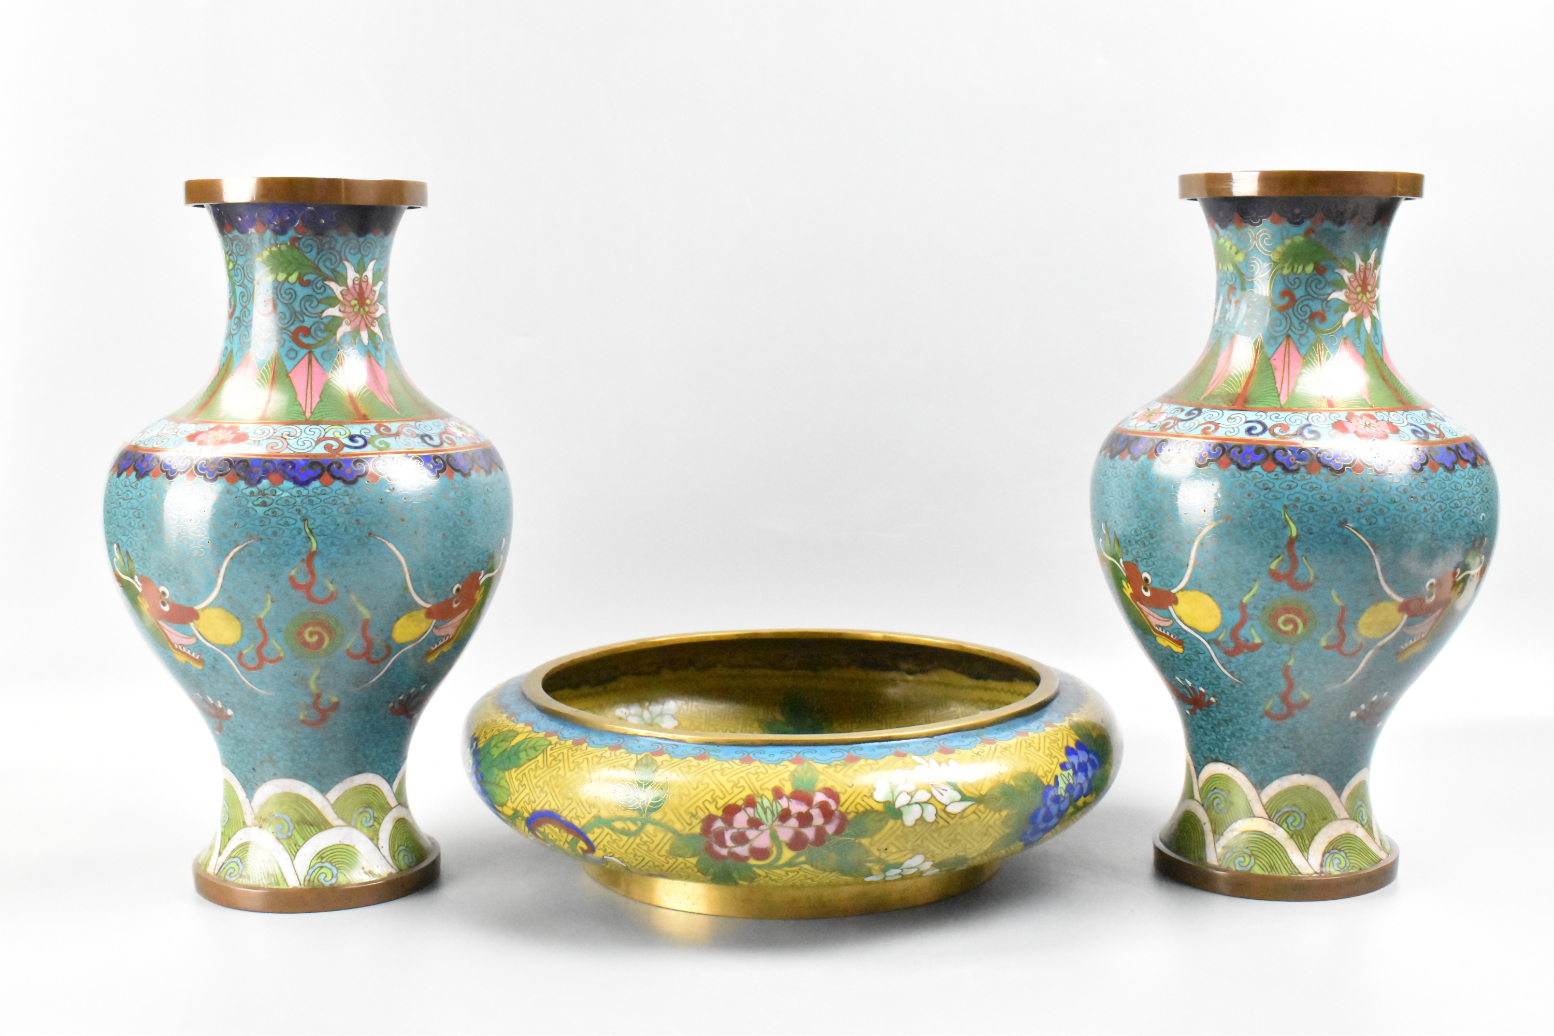 GROUP OF 3 CHINESE CLOISONNE VASE 301534